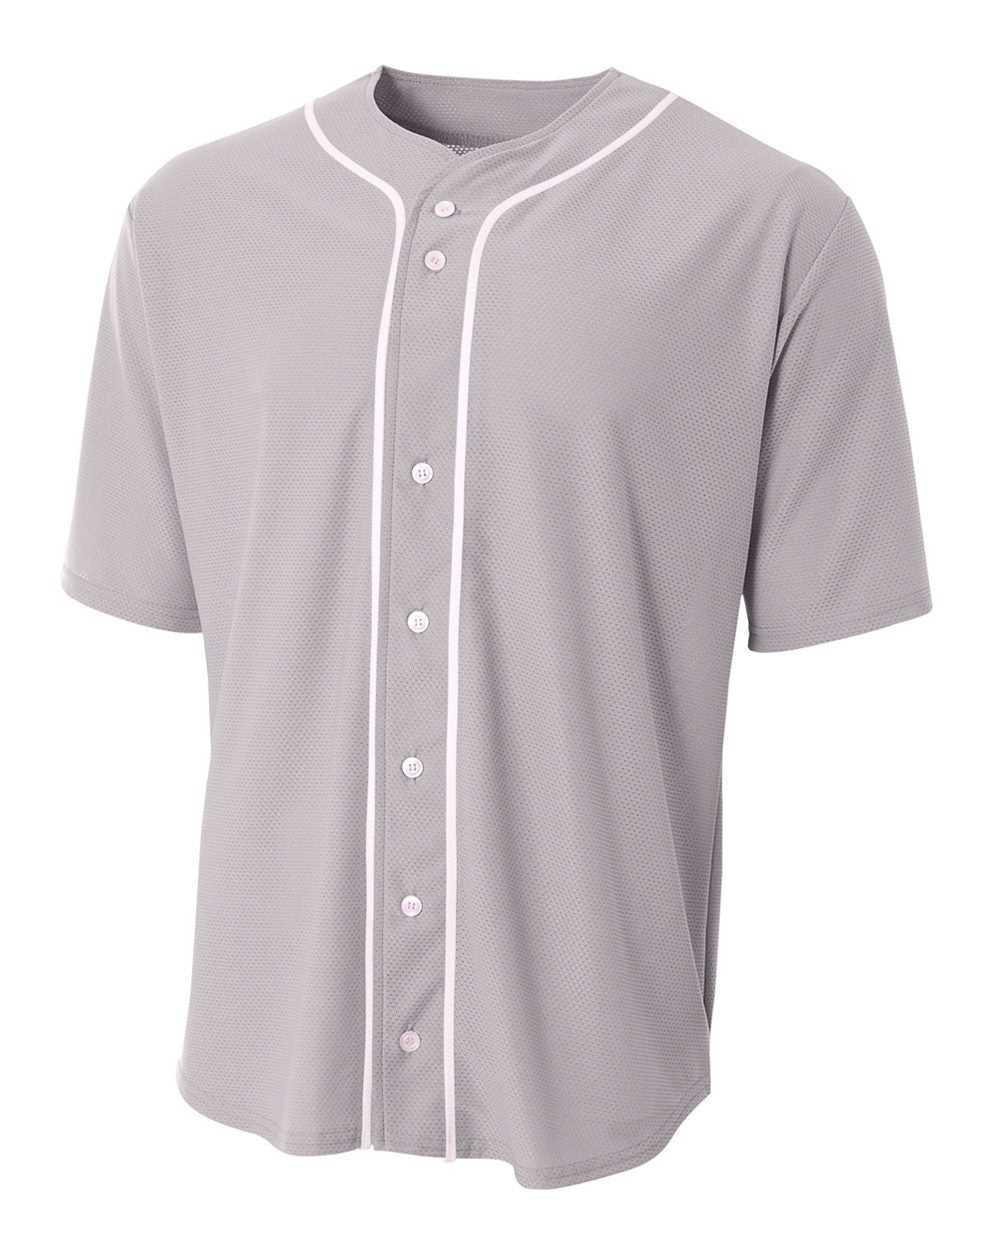 A4 NB4184 Youth Full Button Stretch Mesh Baseball Jersey - Gray White - HIT a Double